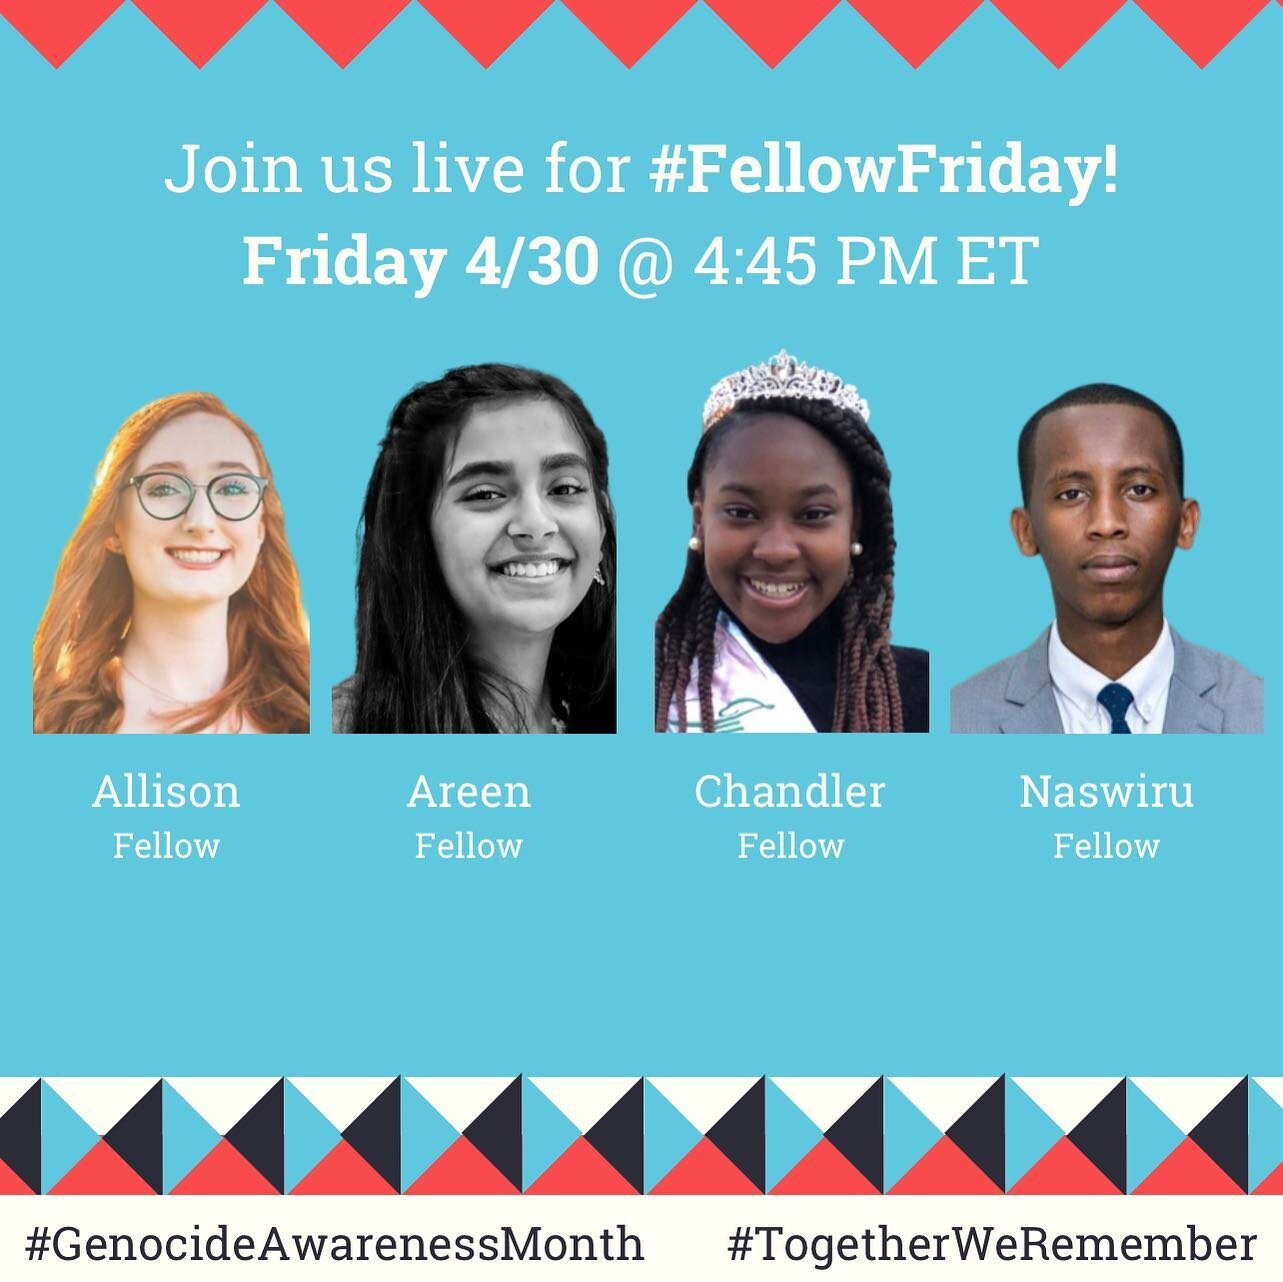 Happy #FellowFriday! Each Friday, TWR's Youth Action Fellow's take over our #Instagram and host a live conversation about their activism &amp; the #BigAsk of the week. 

This week's question is: How will we turn offense into defense when fighting div